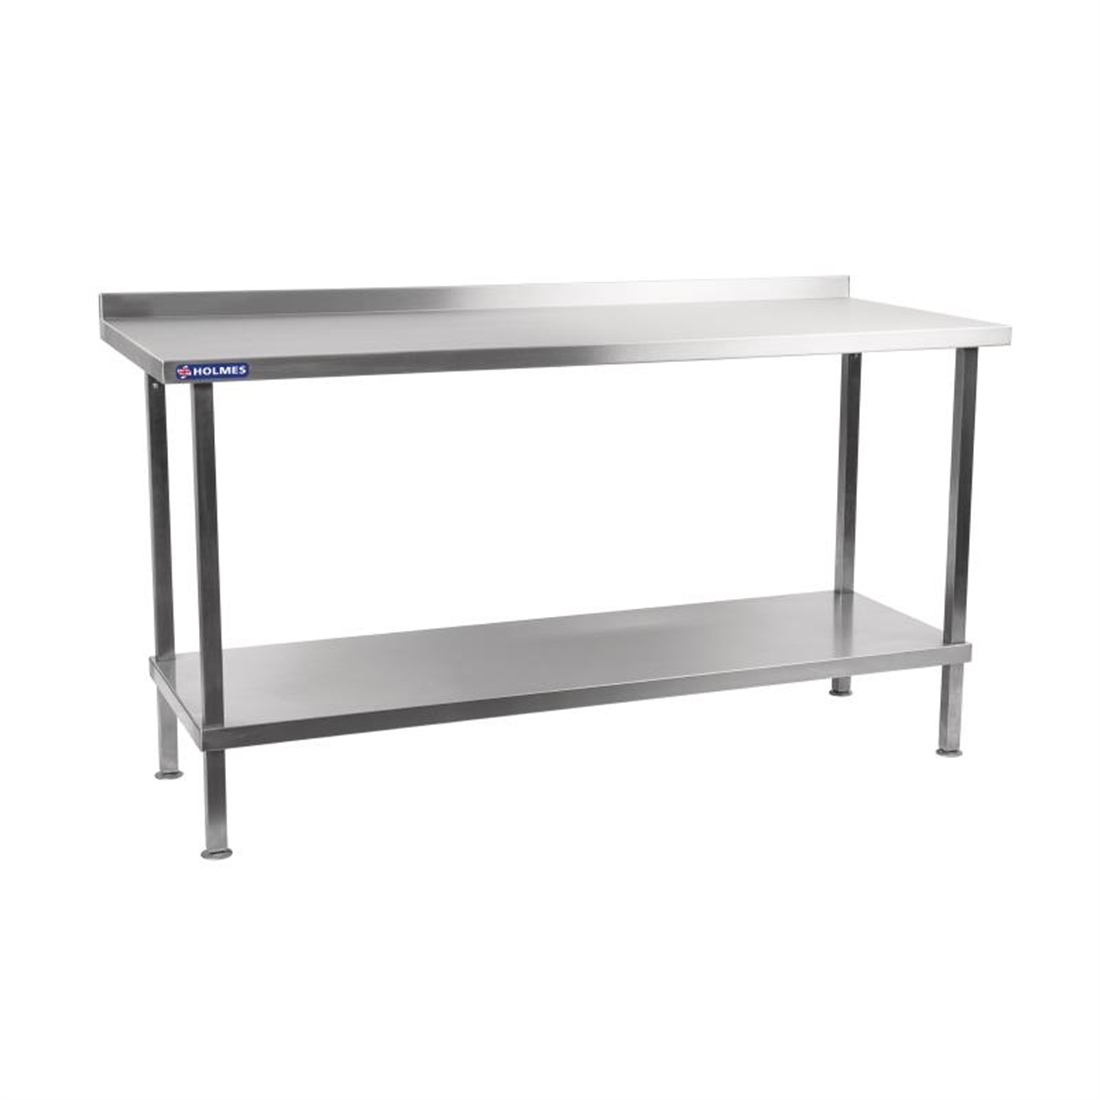 Holmes Self Assembly Stainless Steel Wall Table 2100mm